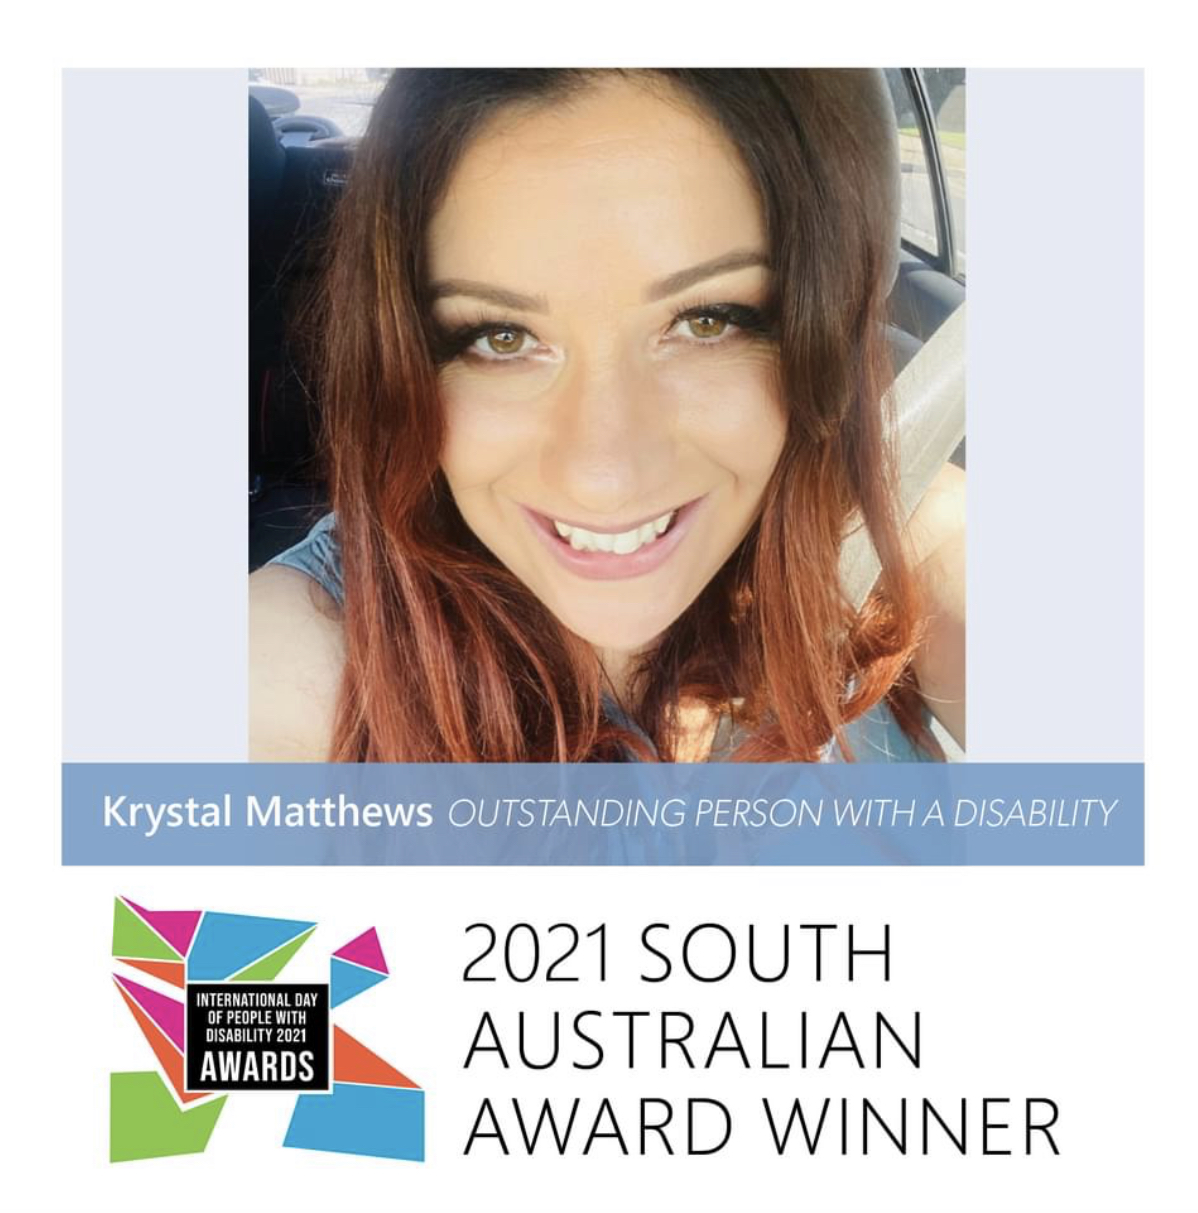 PDA’s SA Associate Director Krystal Matthews named as South Australian Winner in “International Day of People with Disability 2021 Awards”